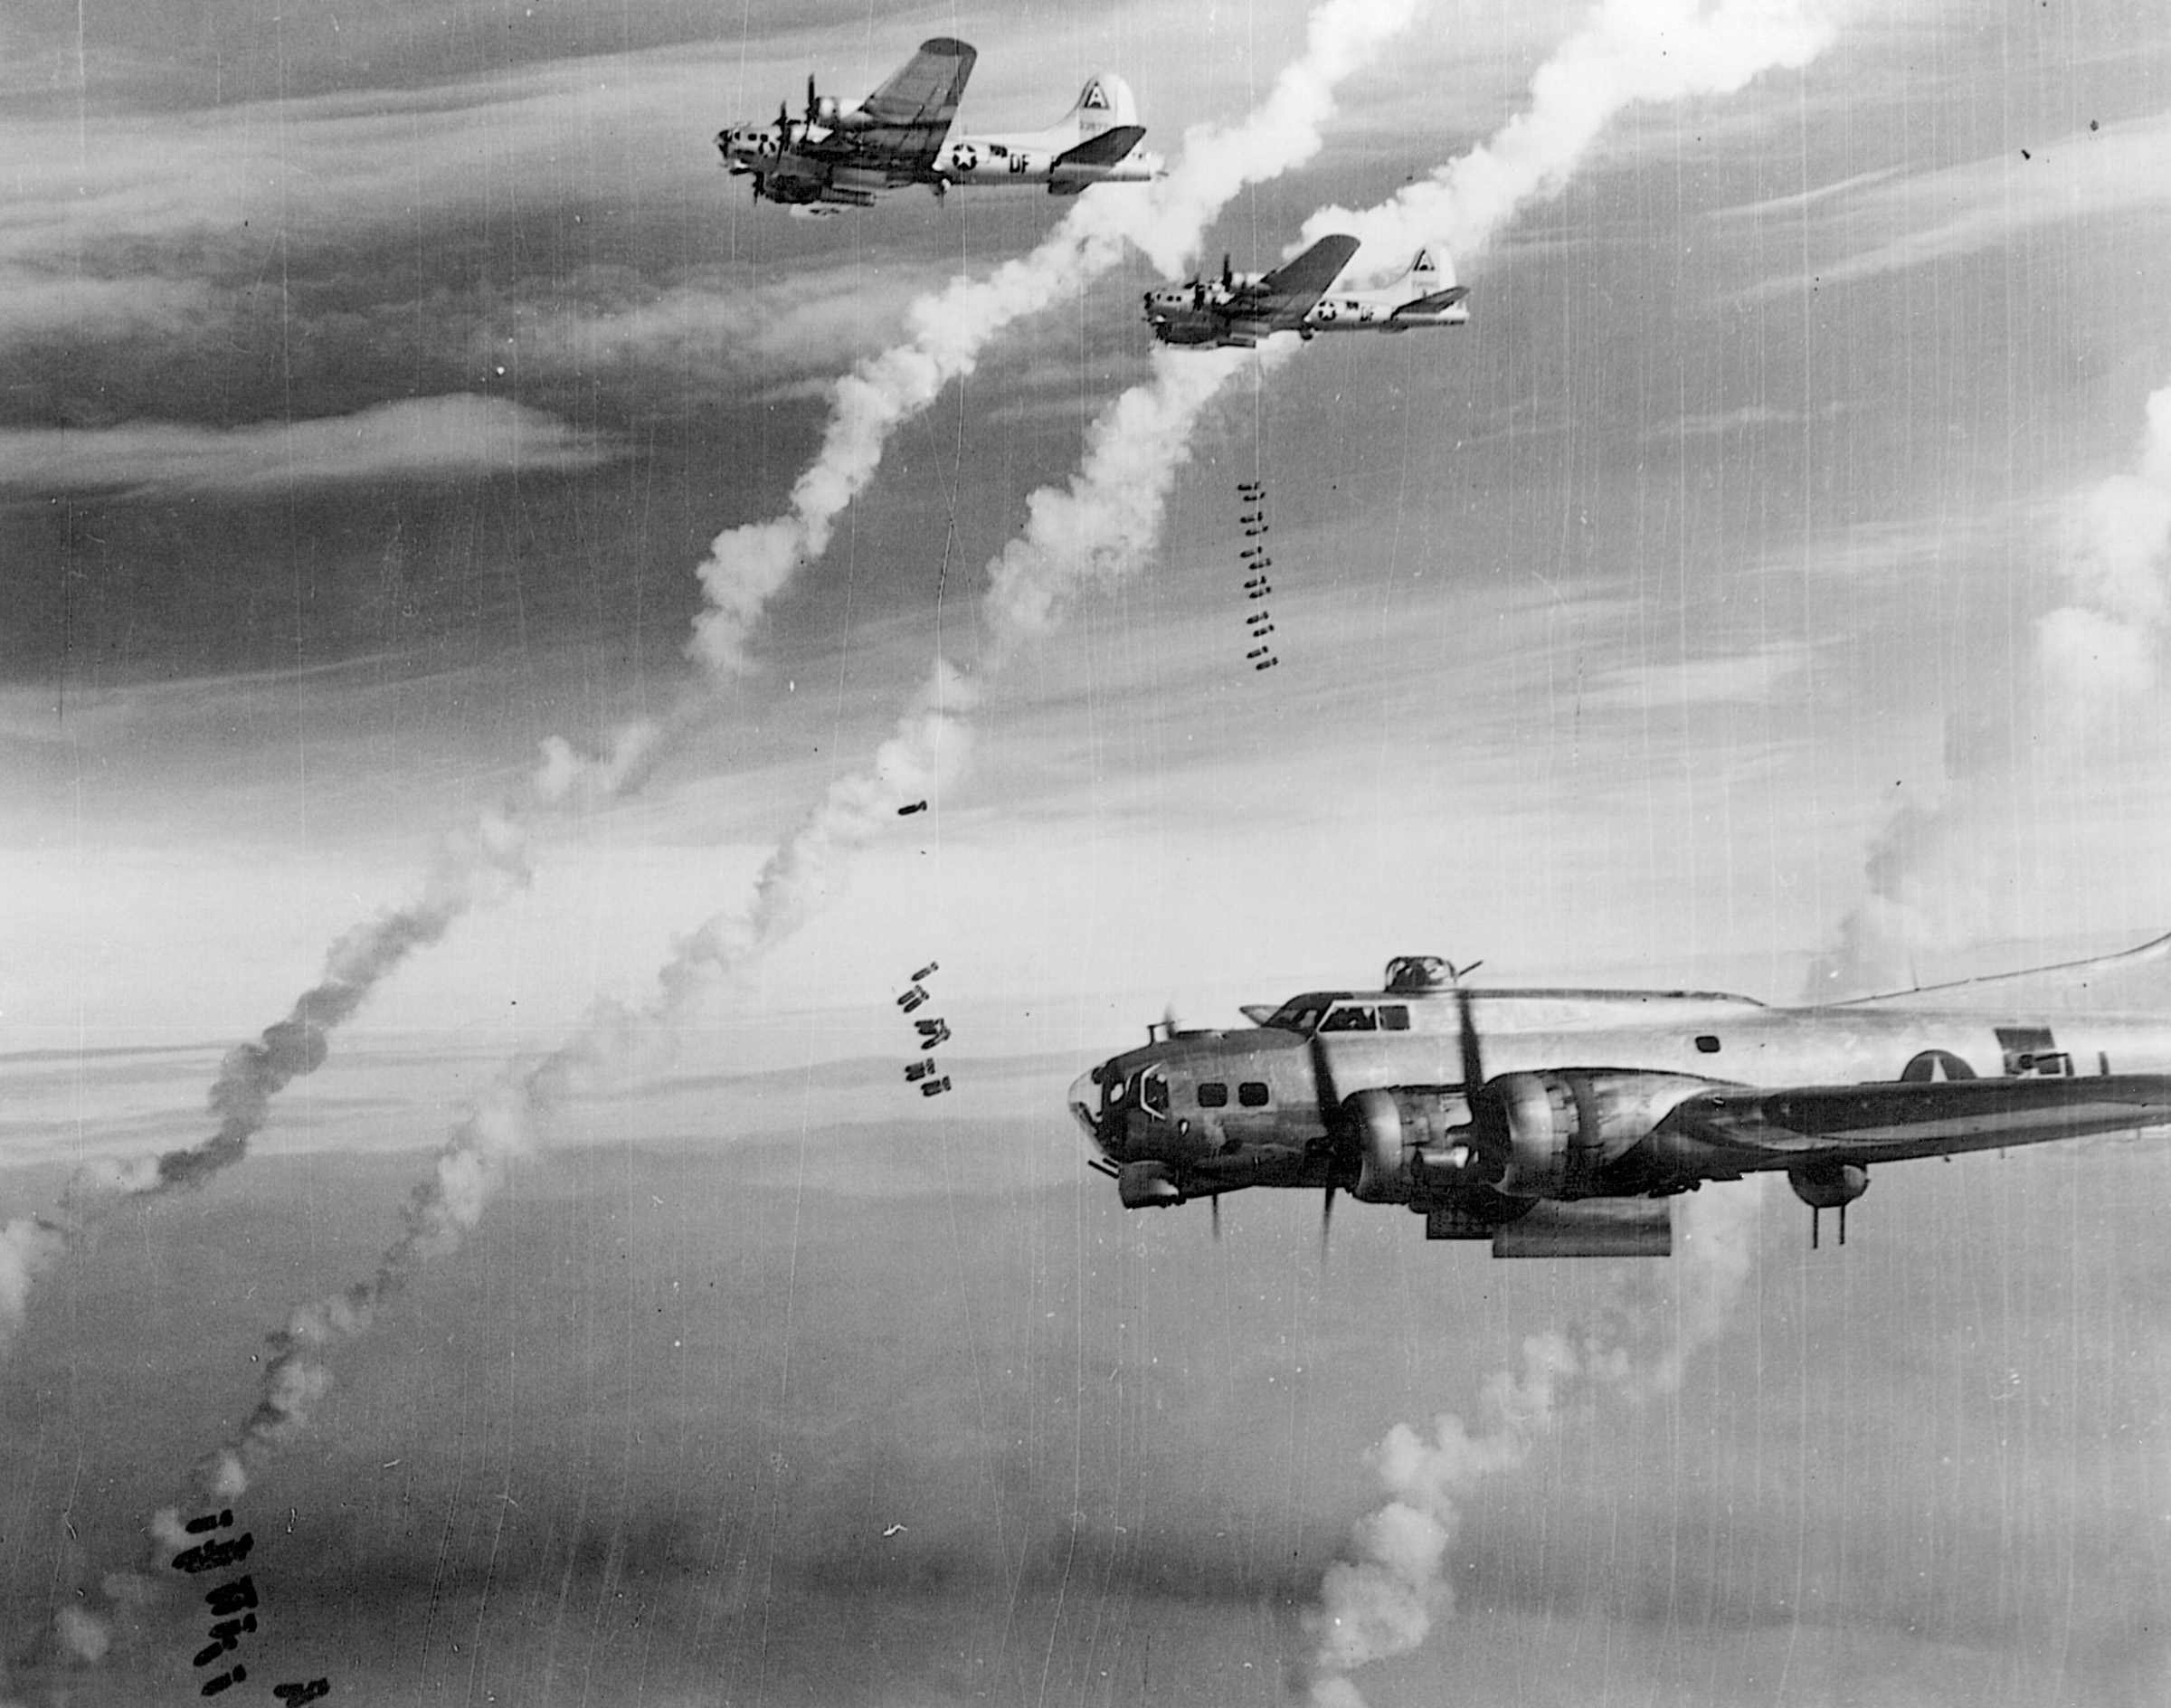 High above Berlin, Eighth Air Force B-17s drop their cargoes of destruction on February 28, 1945. The bombers paid repeated visits to Berlin by day, while the British Royal Air Force bombed German cities by night.